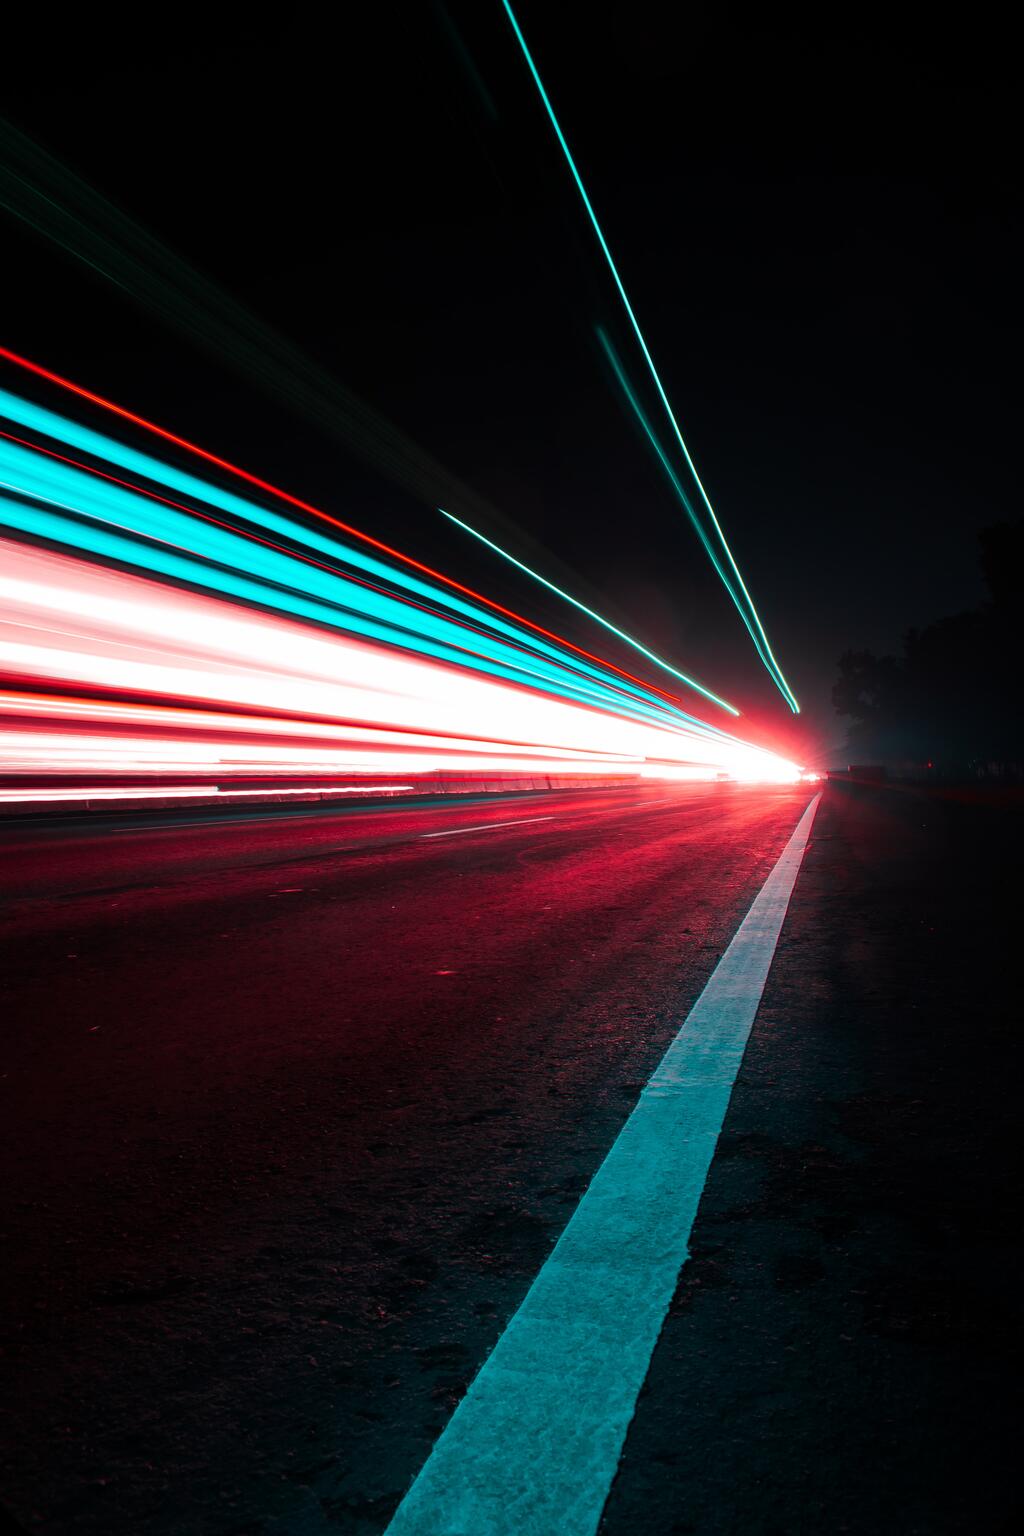 cars running past the camera. The lights are drawnout by the shutter mode of the camera making the lights look like fixed lines of light to the horizon.